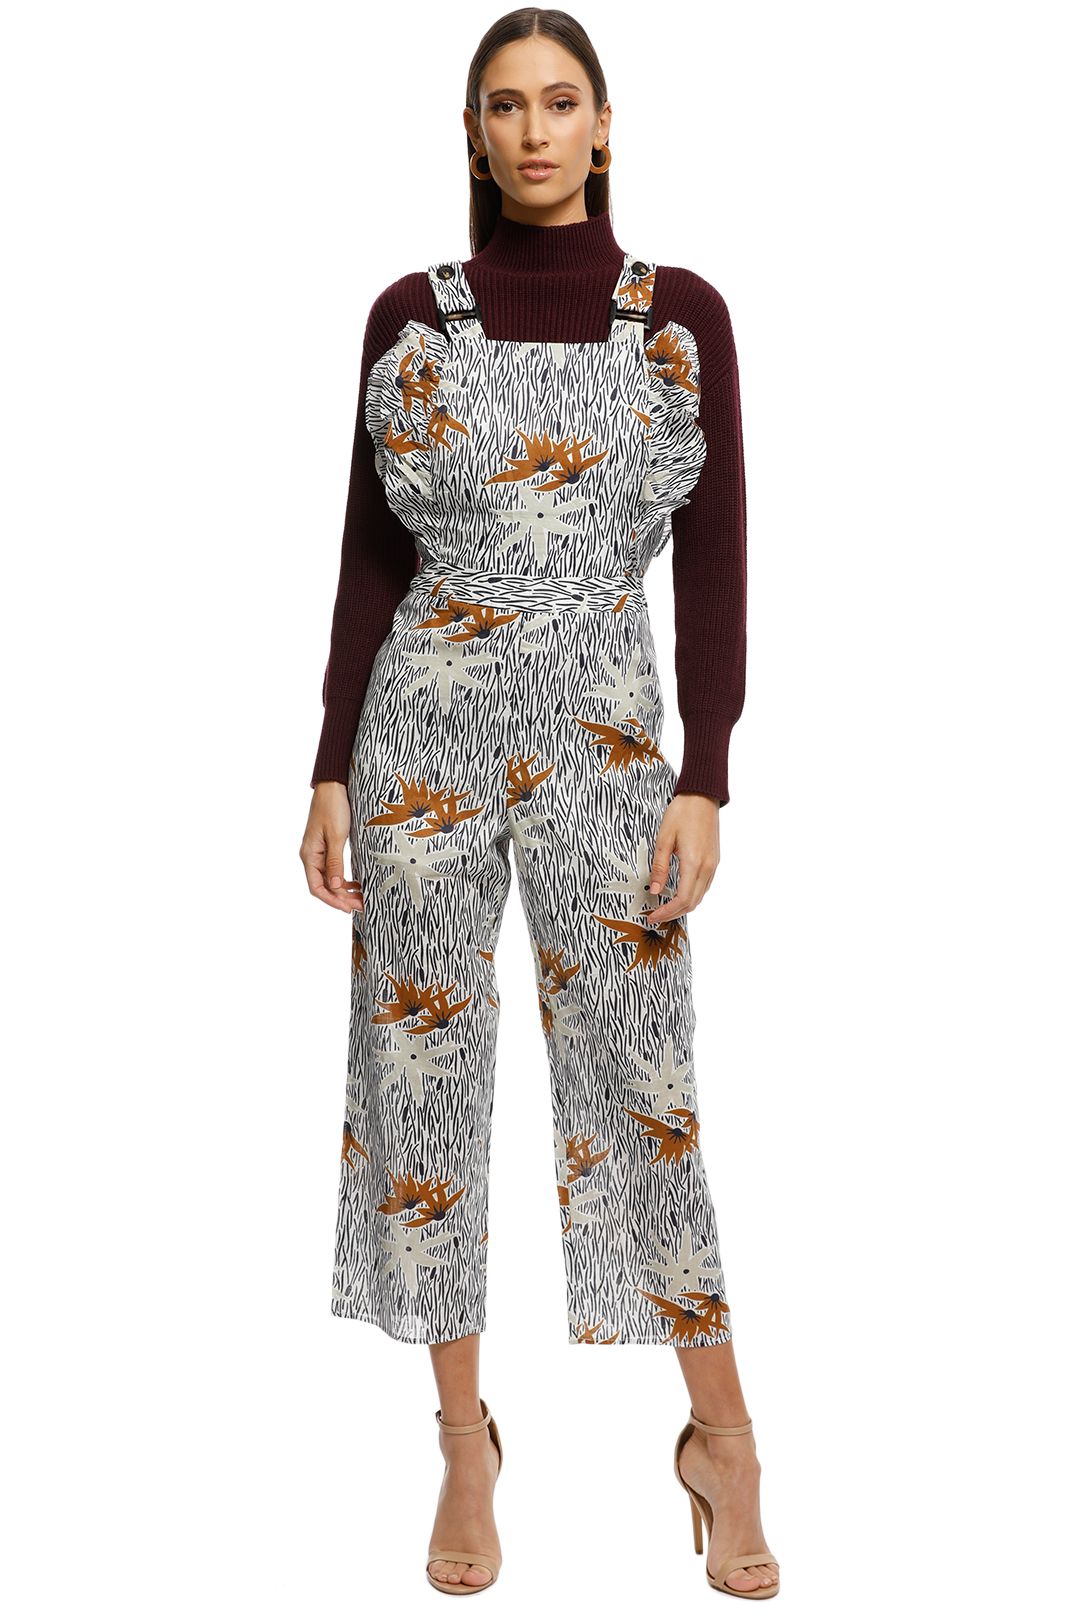 Stevie-May-Wayfaring-Jumpsuit-Bamboo-Floral-Front